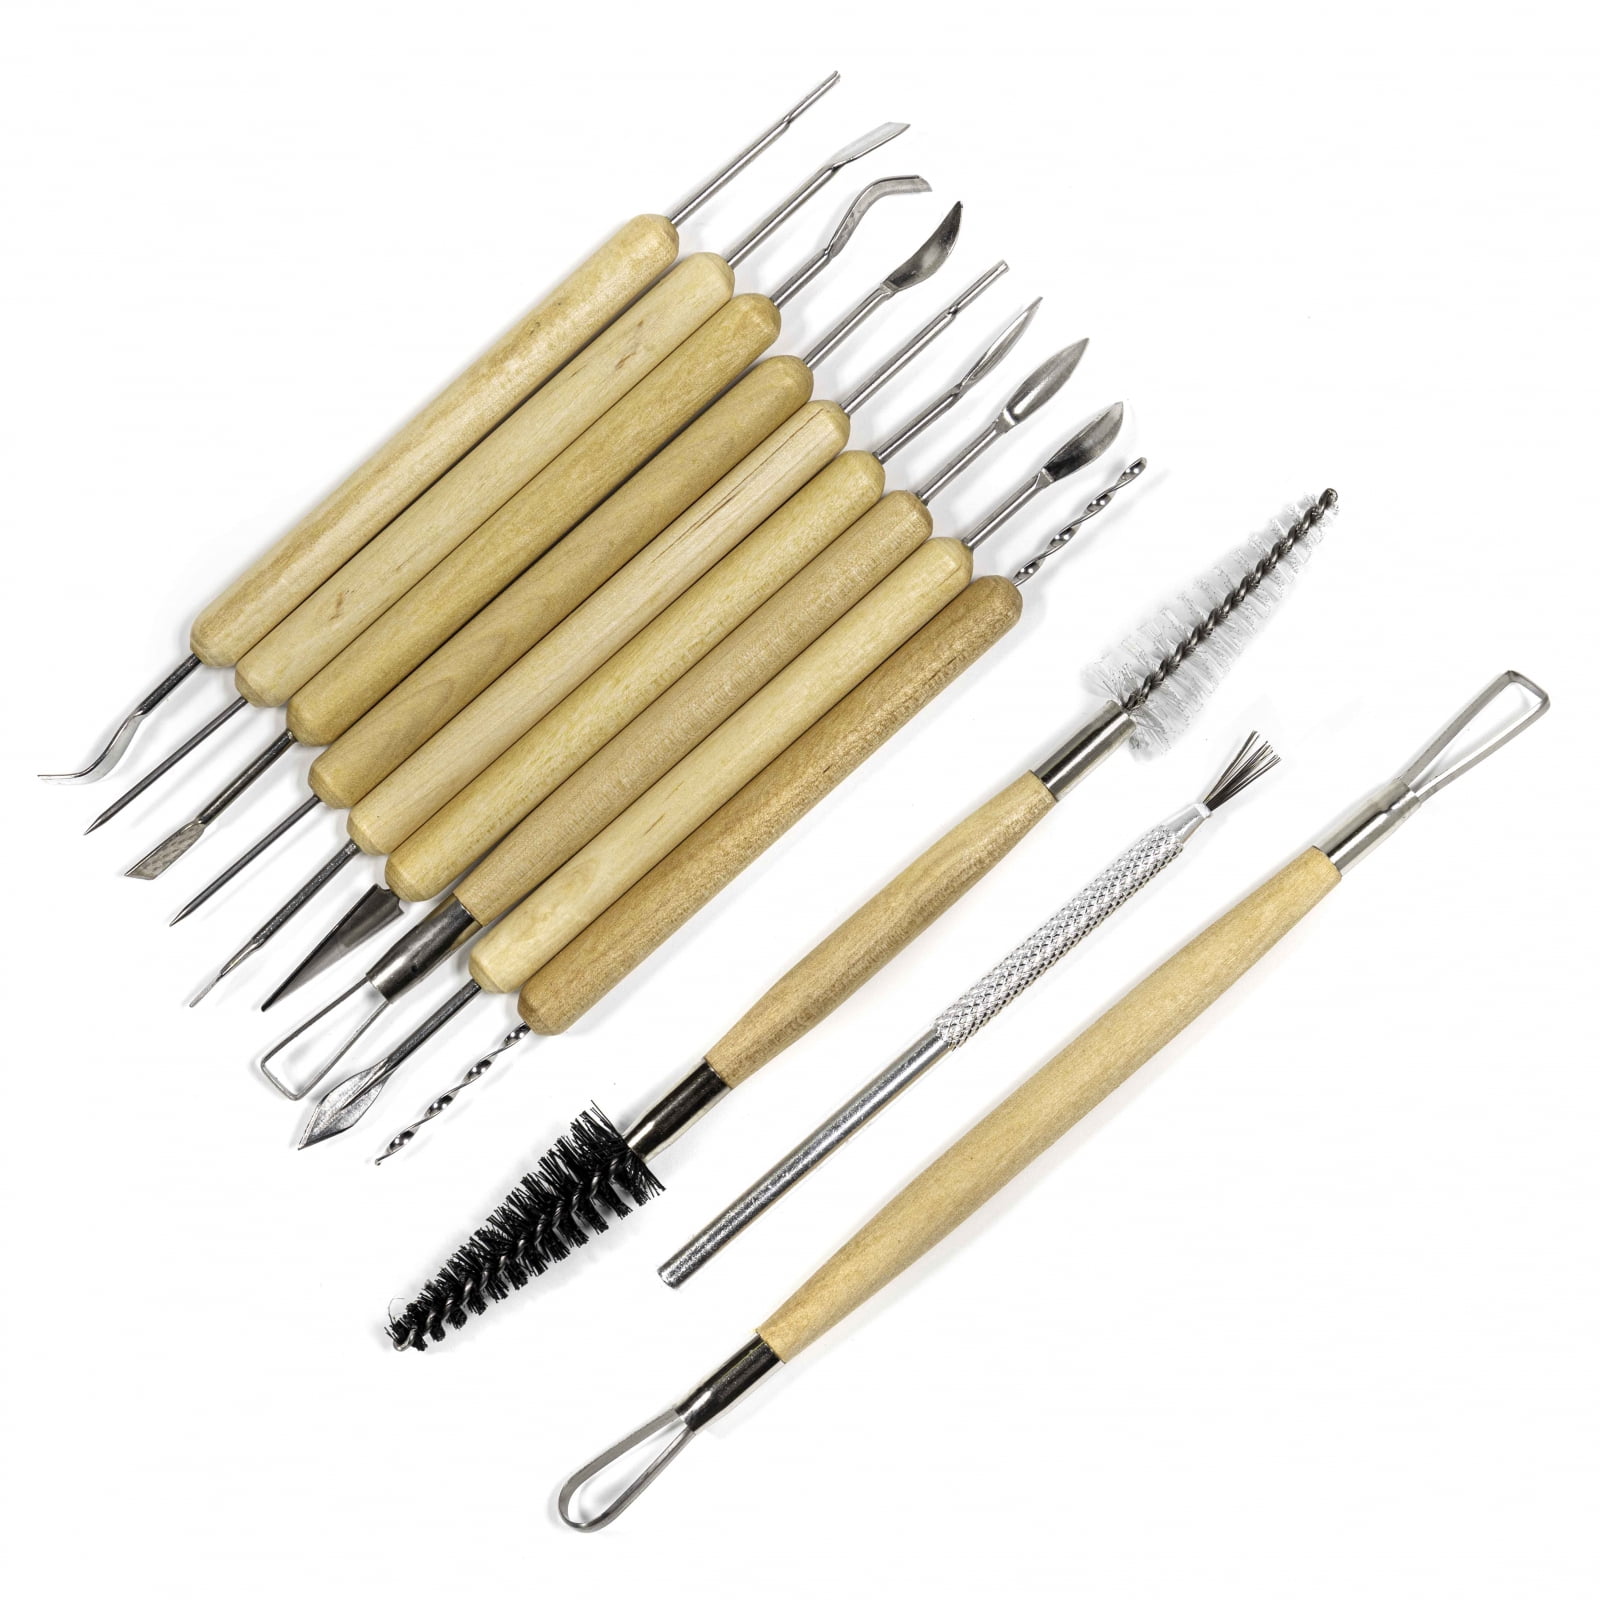 Sculpt Pro Pottery Tool Kit - 11-Piece 21-Tool Beginner's Clay Sculpting  Set - Great Gift